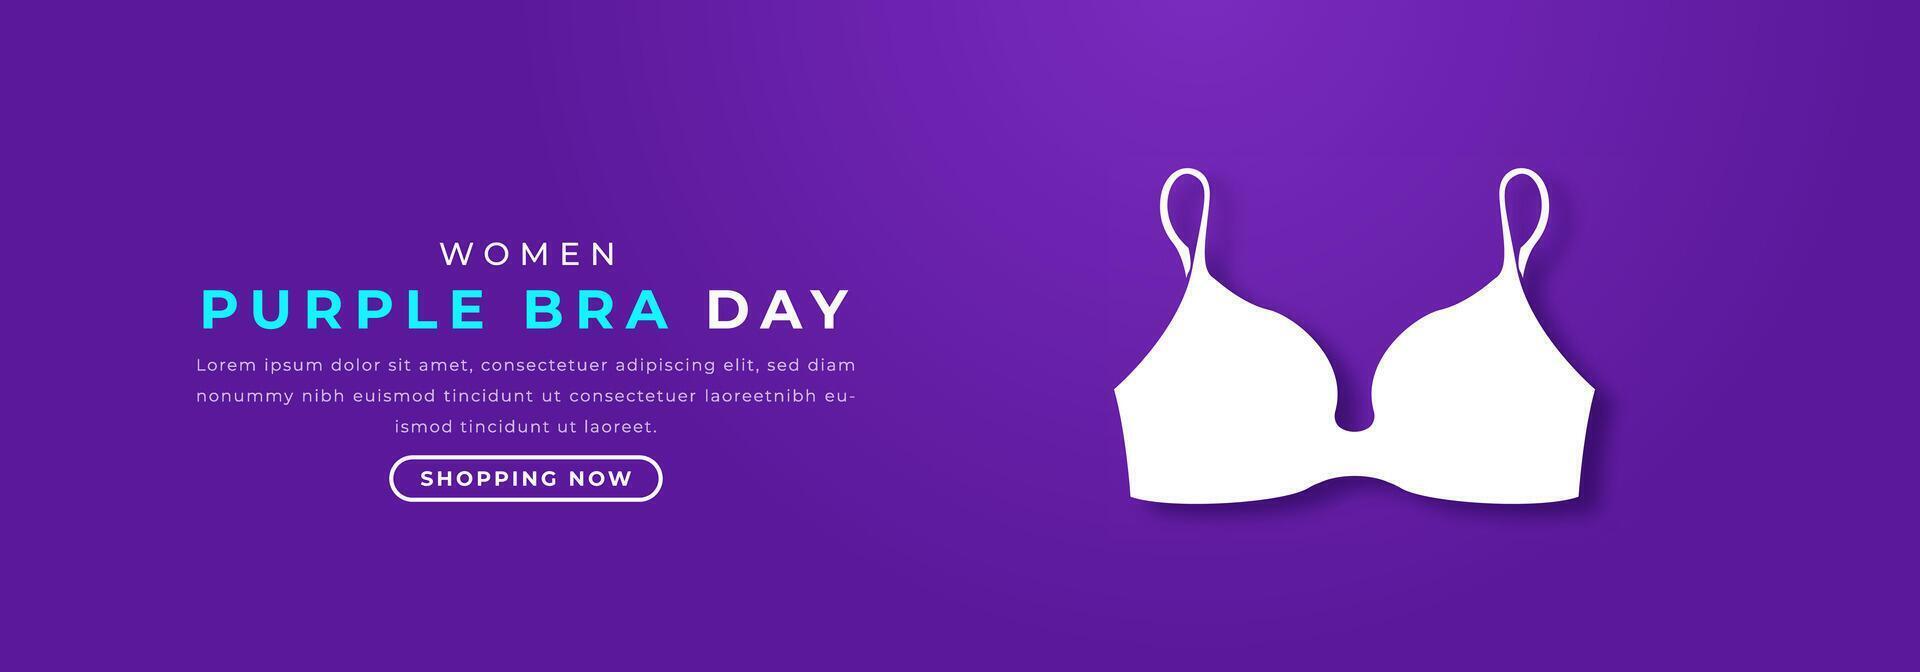 Purple Bra Day Paper cut style Vector Design Illustration for Background, Poster, Banner, Advertising, Greeting Card